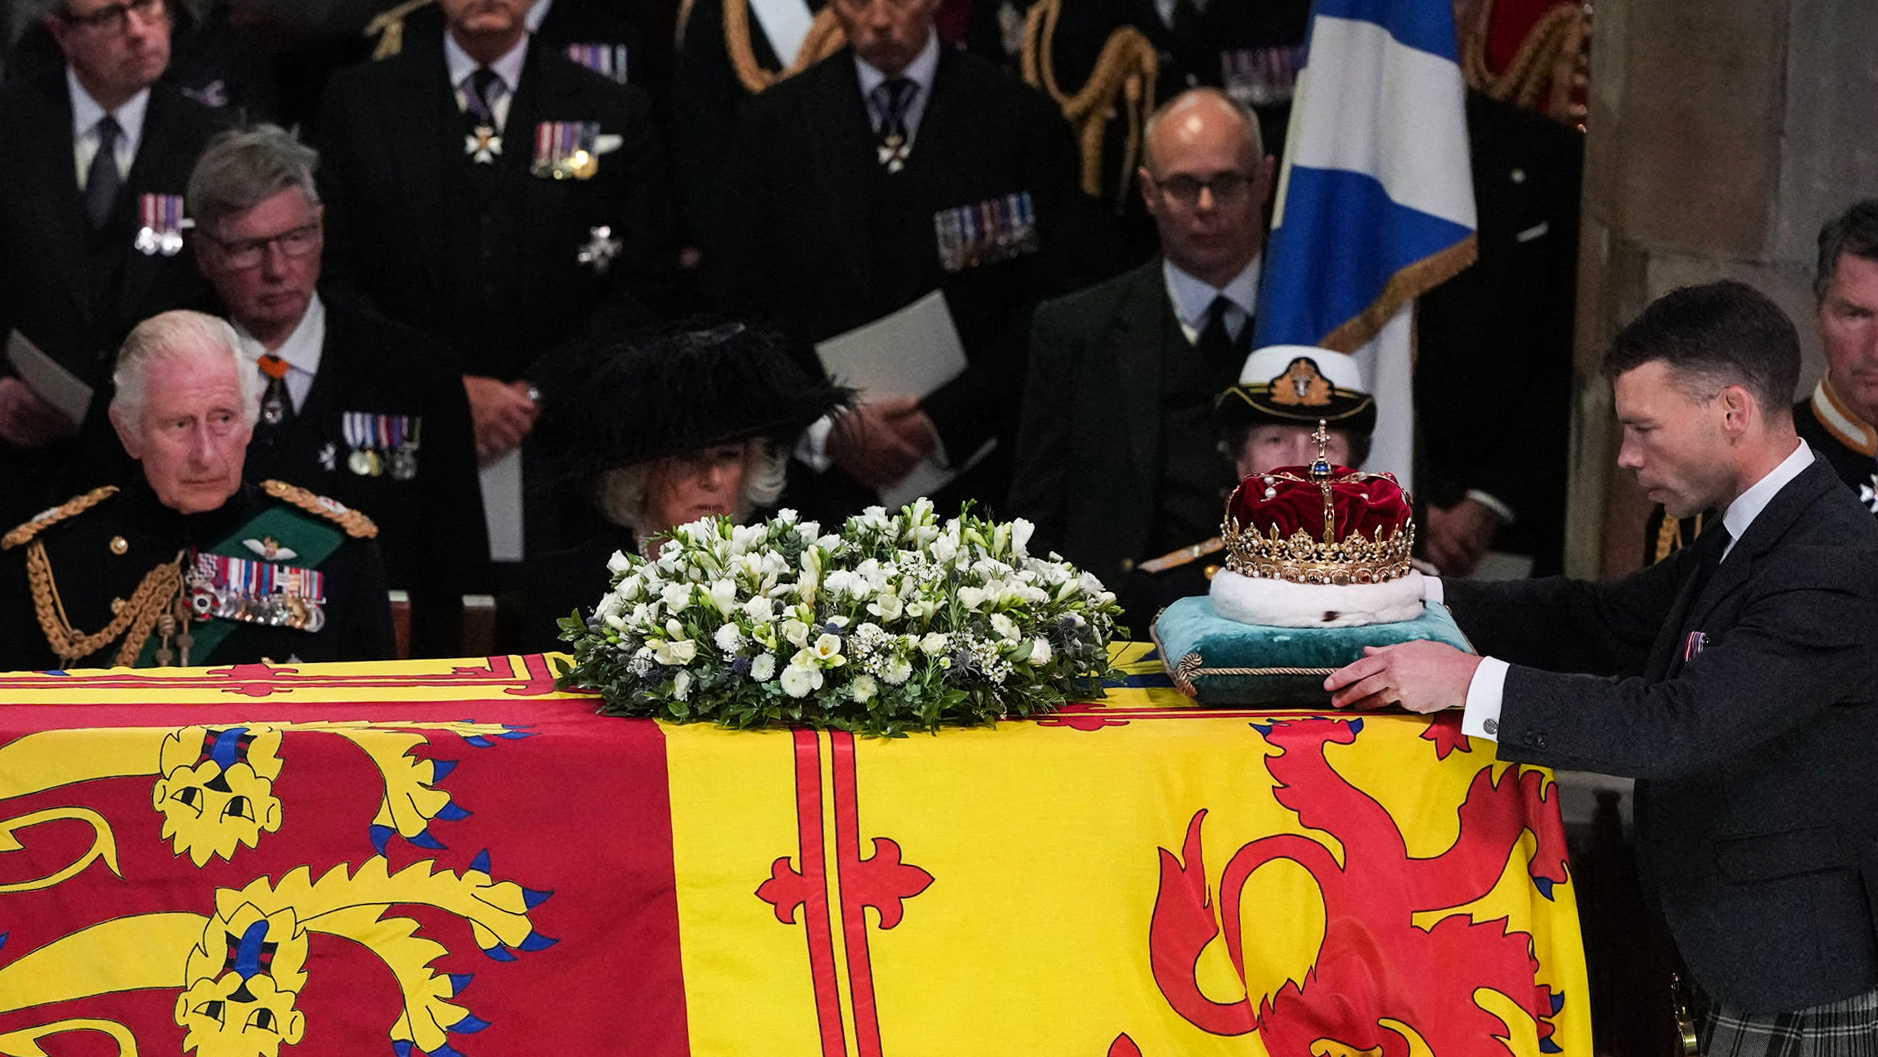 <p>Britain's King Charles III, Camilla, Queen Consort and Princess Anne, Princess Royal watched as the Duke of Hamilton, Alexander Douglas-Hamilton, placed the Crown of Scotland atop the coffin of Queen Elizabeth II inside St. Giles Cathedral in Edinburgh, Scotland, on Sept. 12, 2022, during a Service of Thanksgiving honoring her life a week before her funeral was to be held in London. </p>